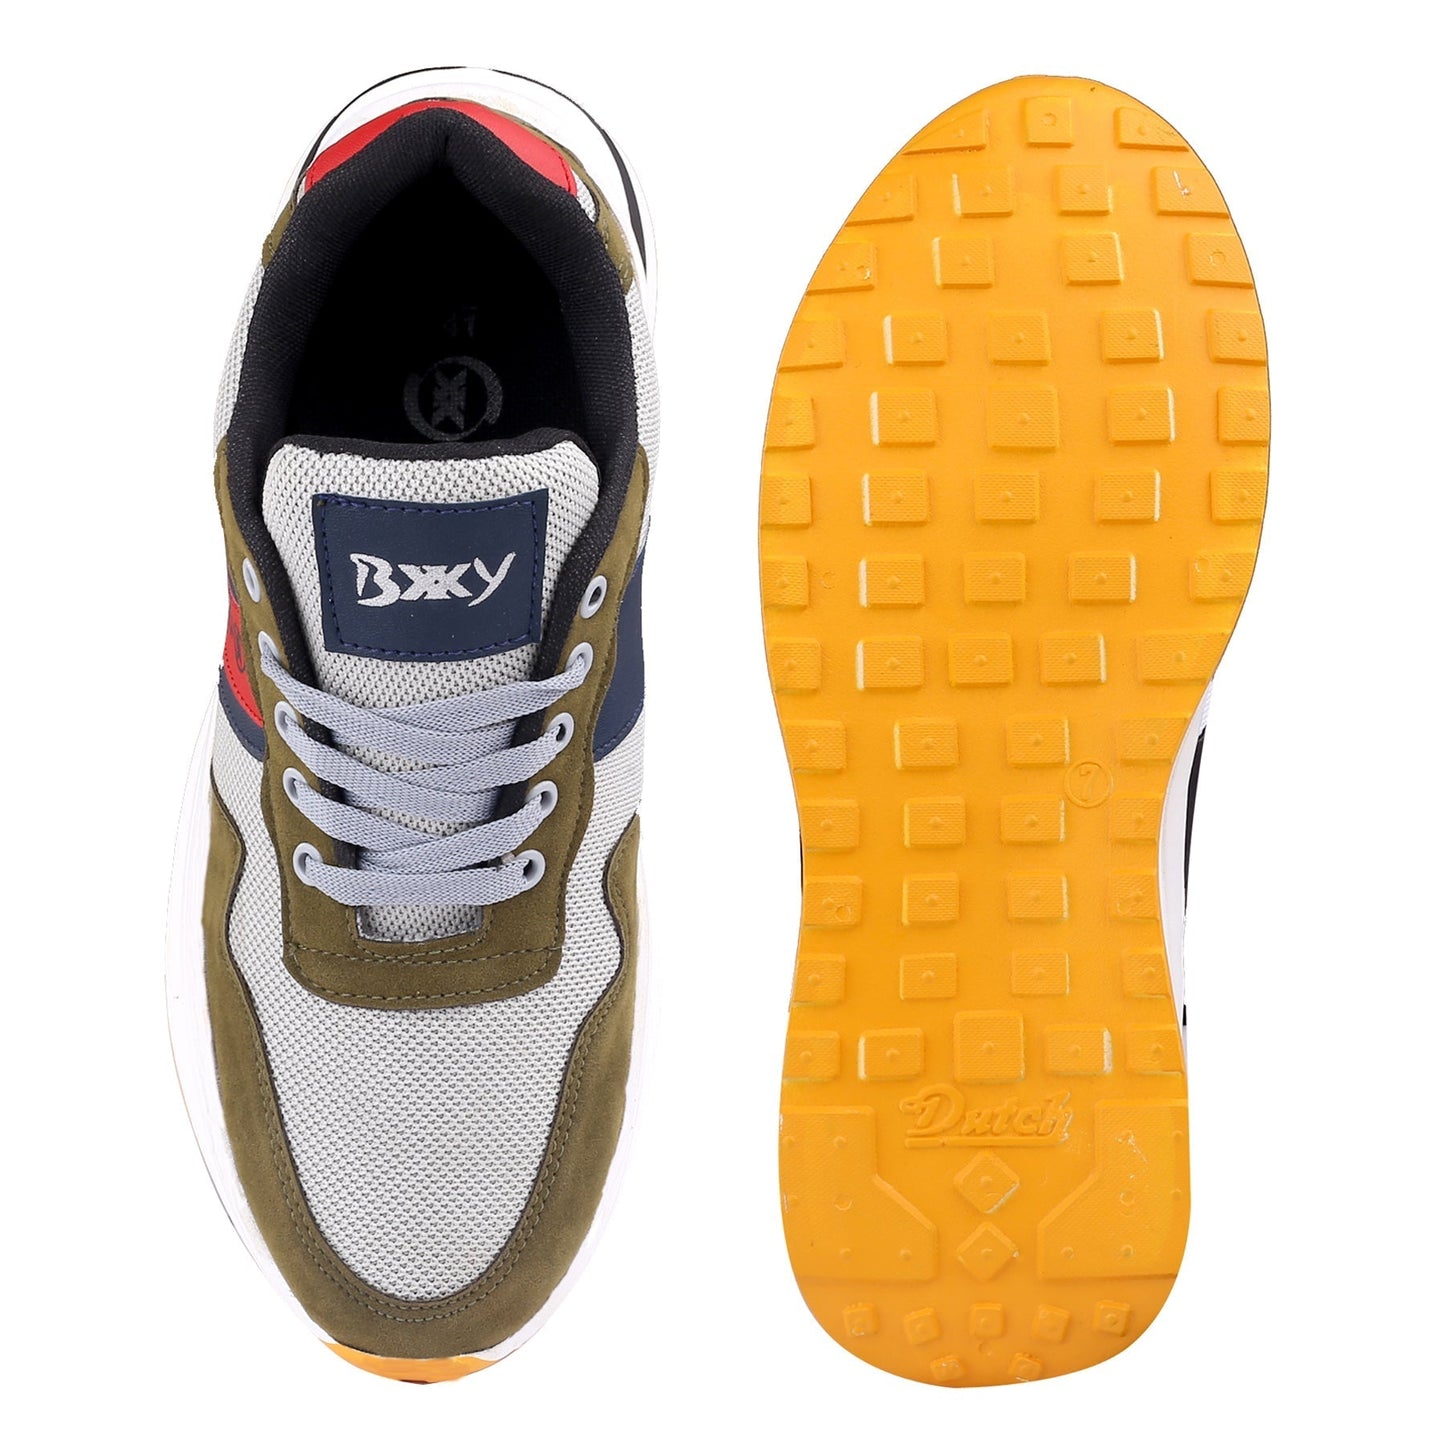 Bxxy's Casual Lace-up Shoes for all Seasons